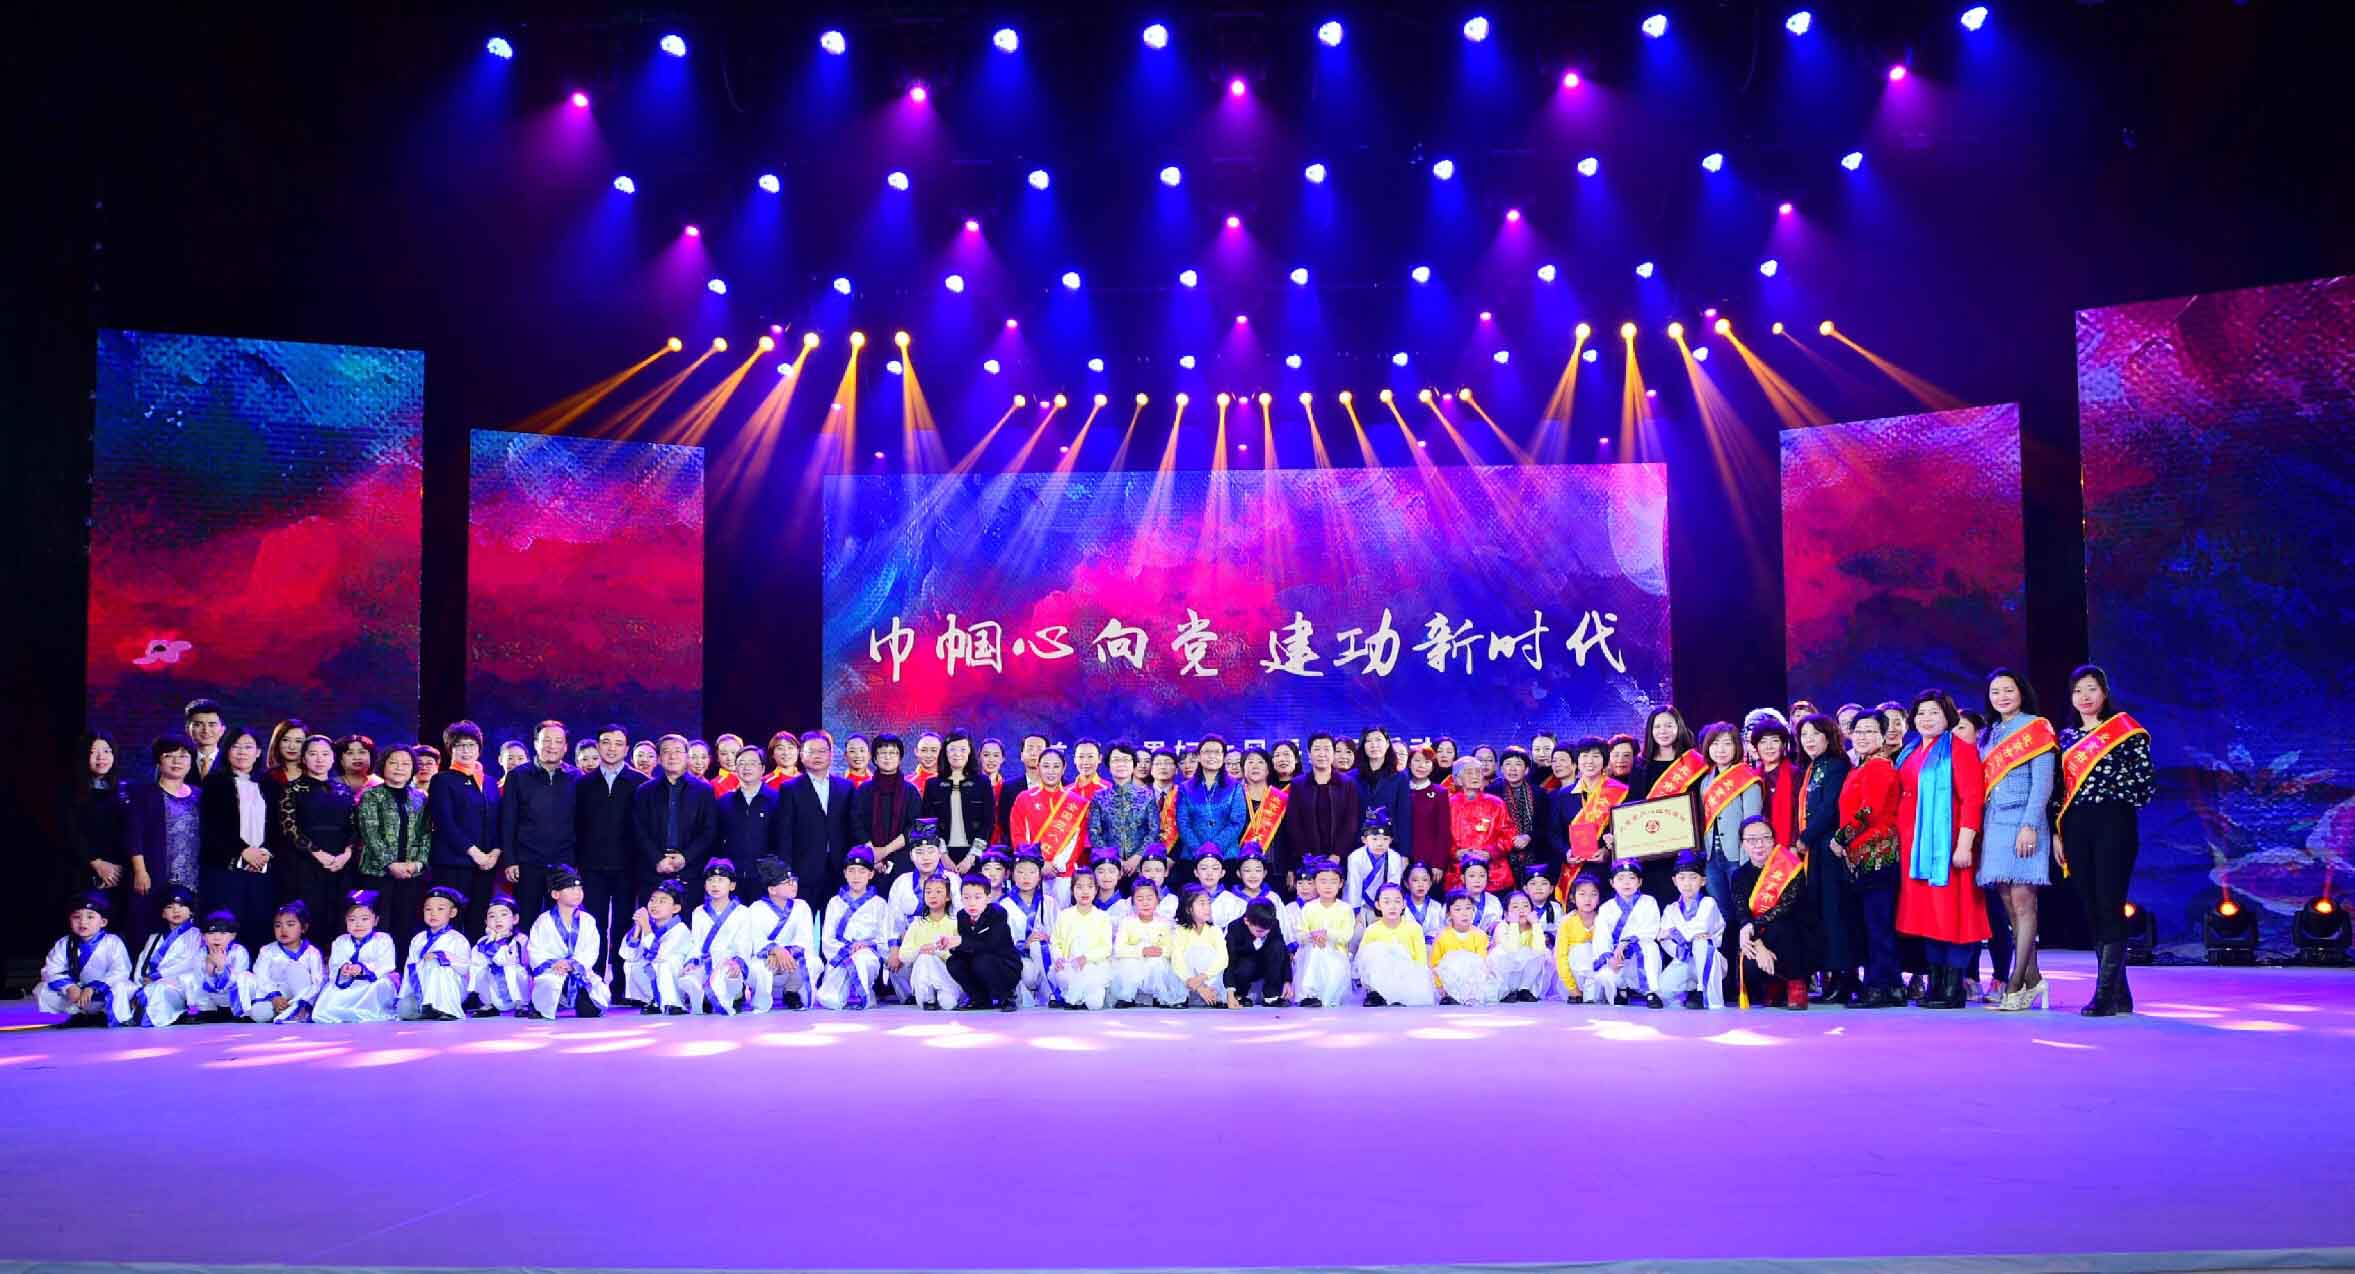 Federation Holds Ceremony to Celebrate Achievements of Women in Beijing